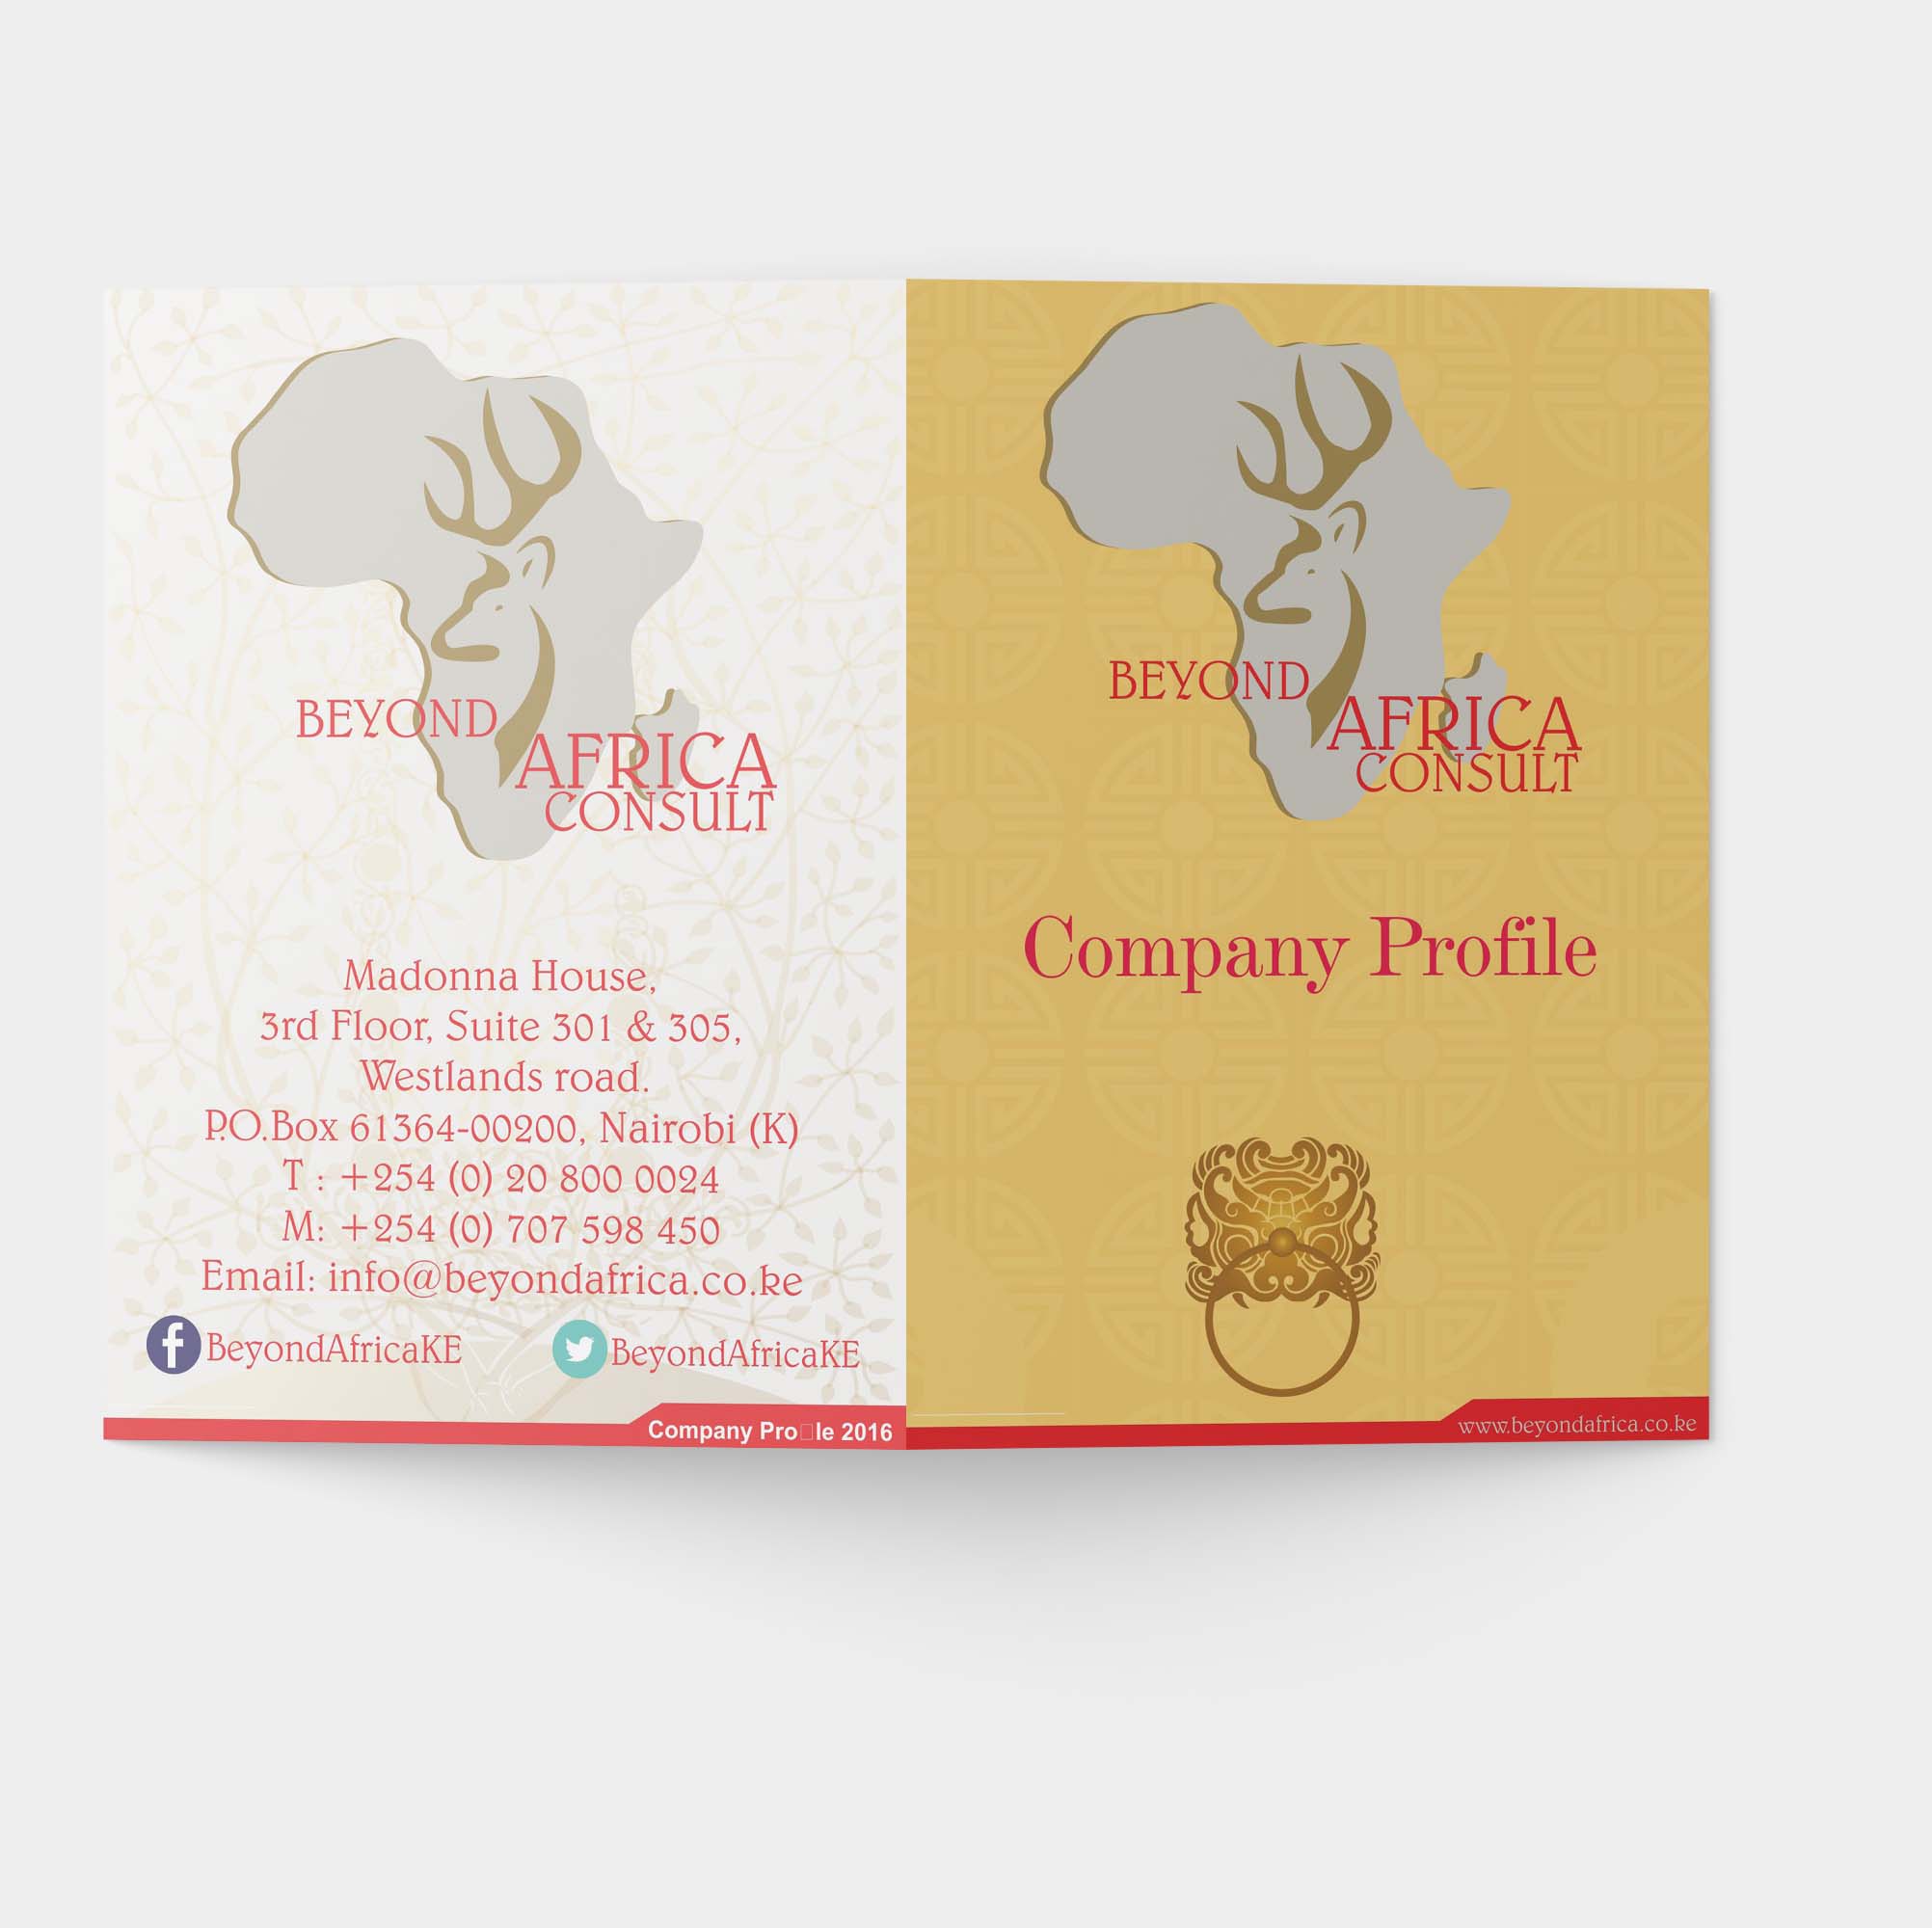 Beyond Africa Consult Profile